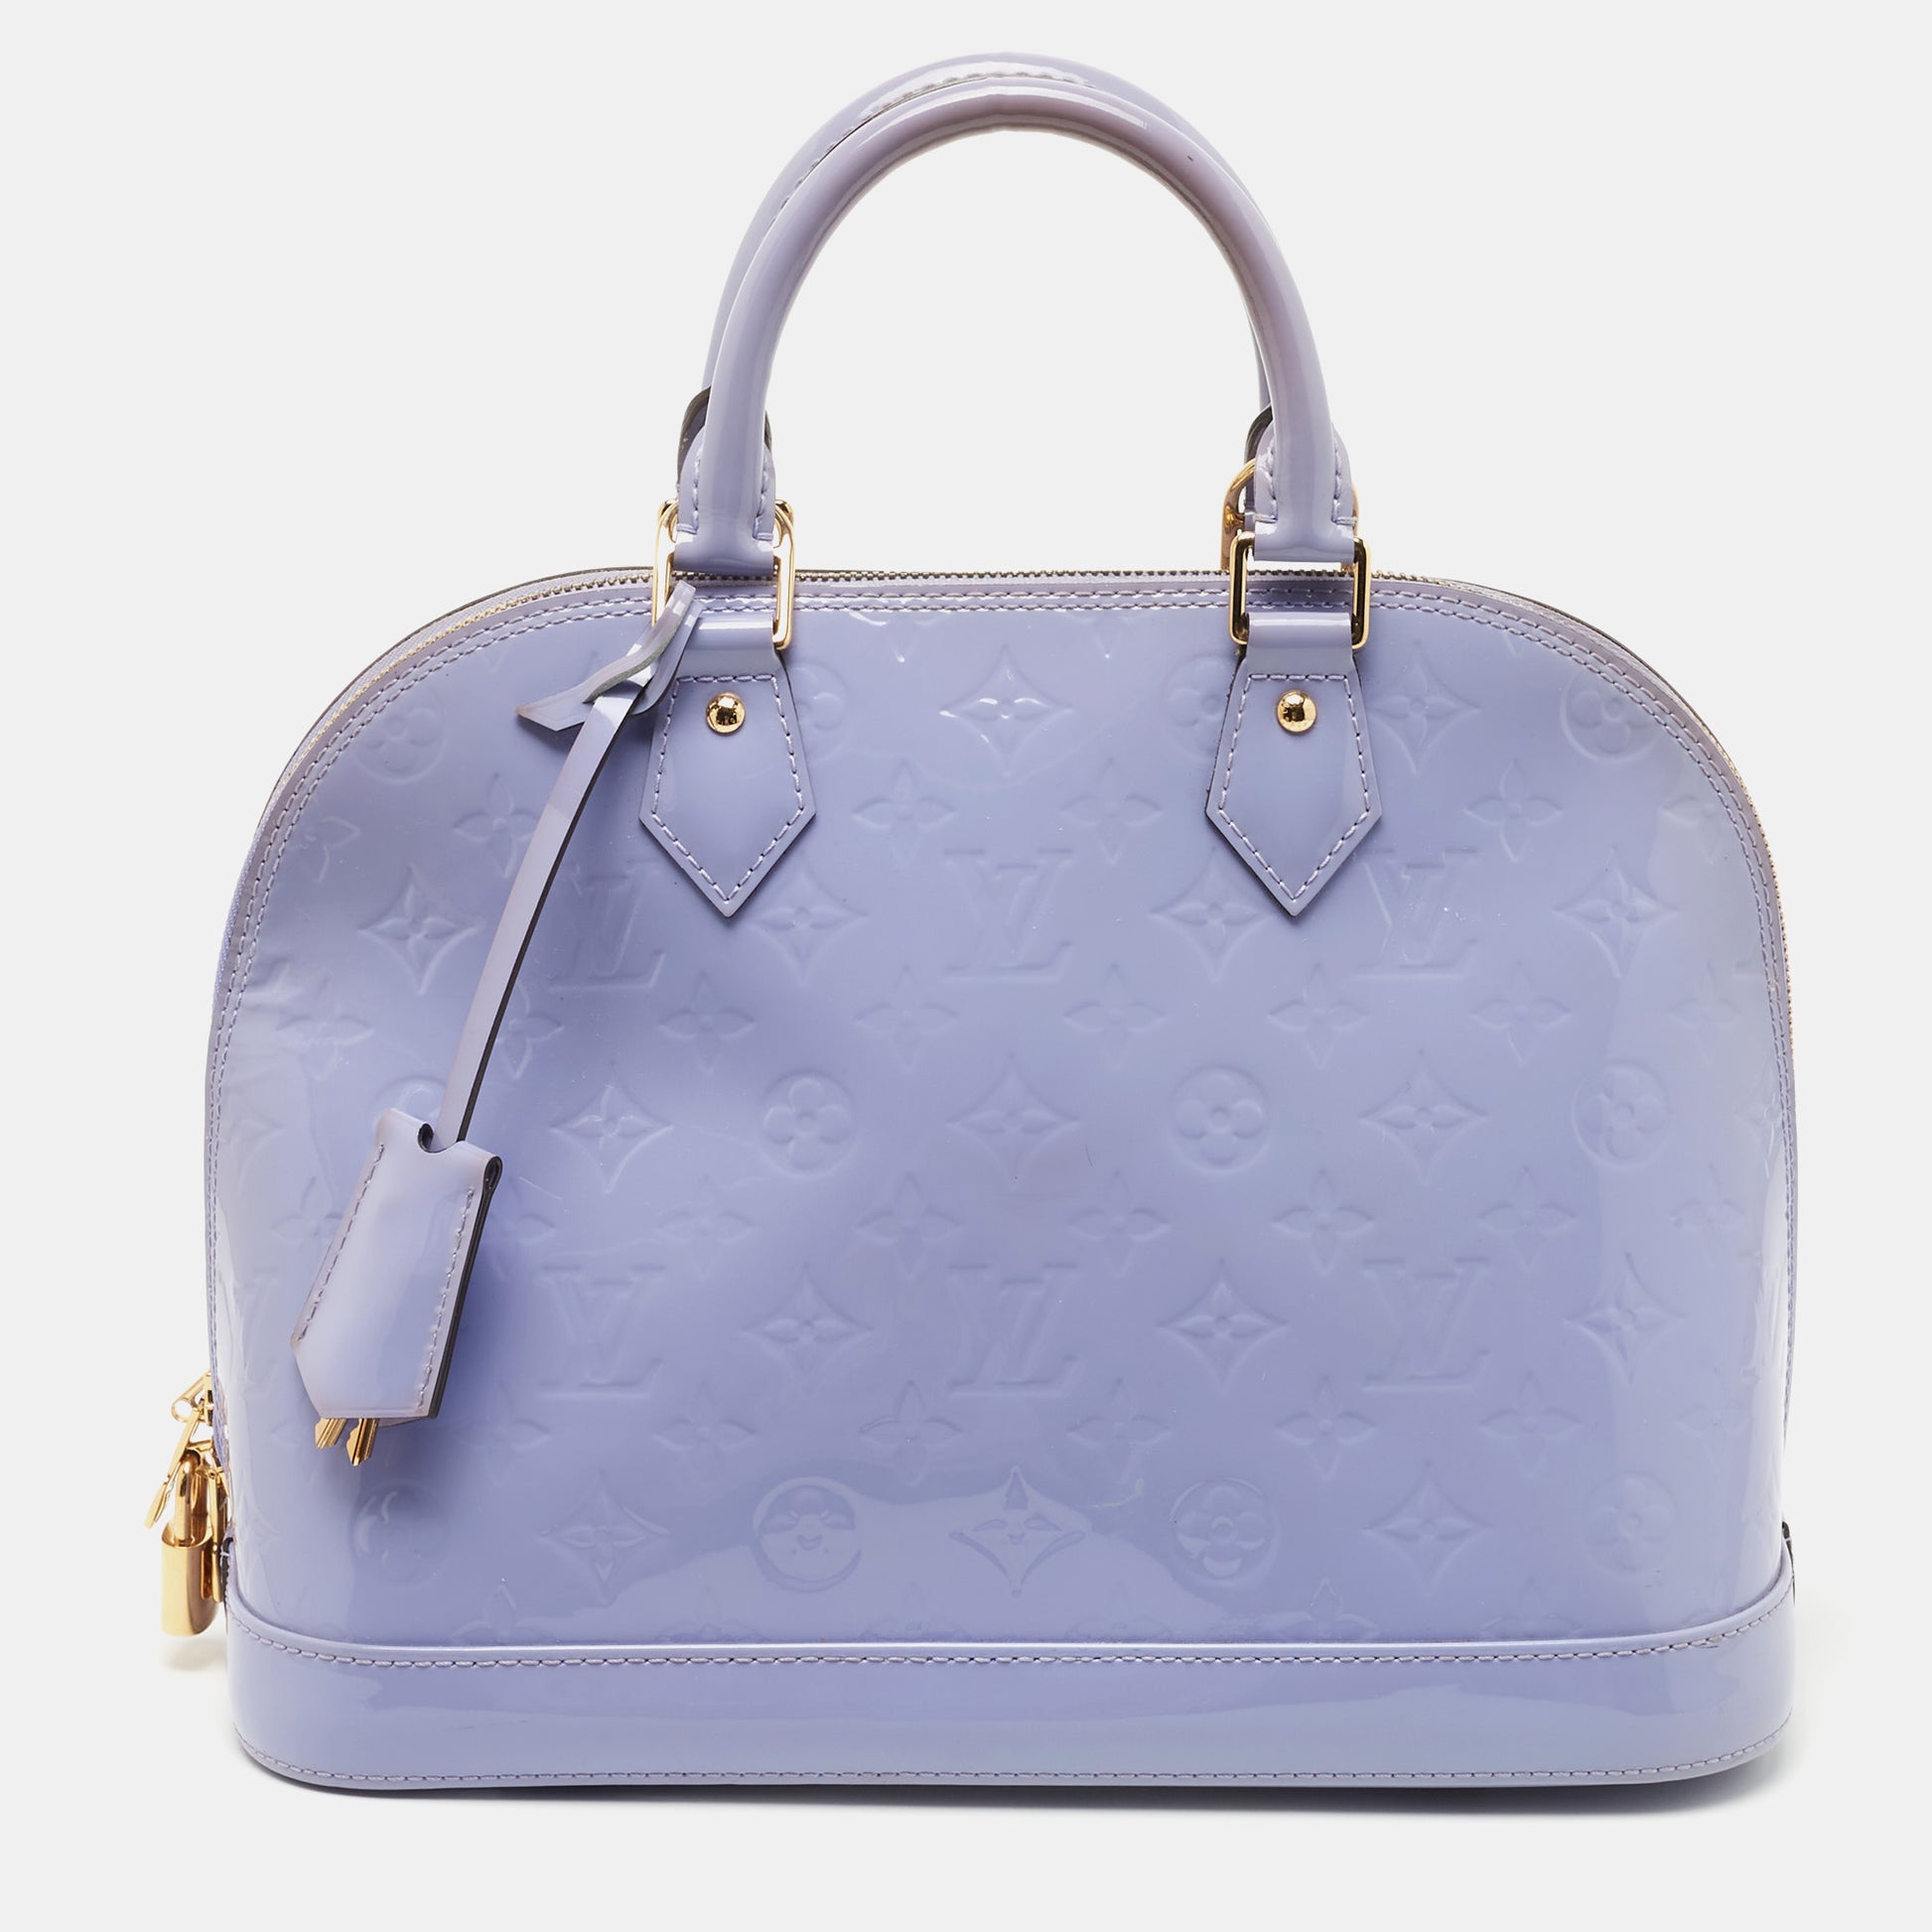 LV Alma PM Bag With All White Outfit